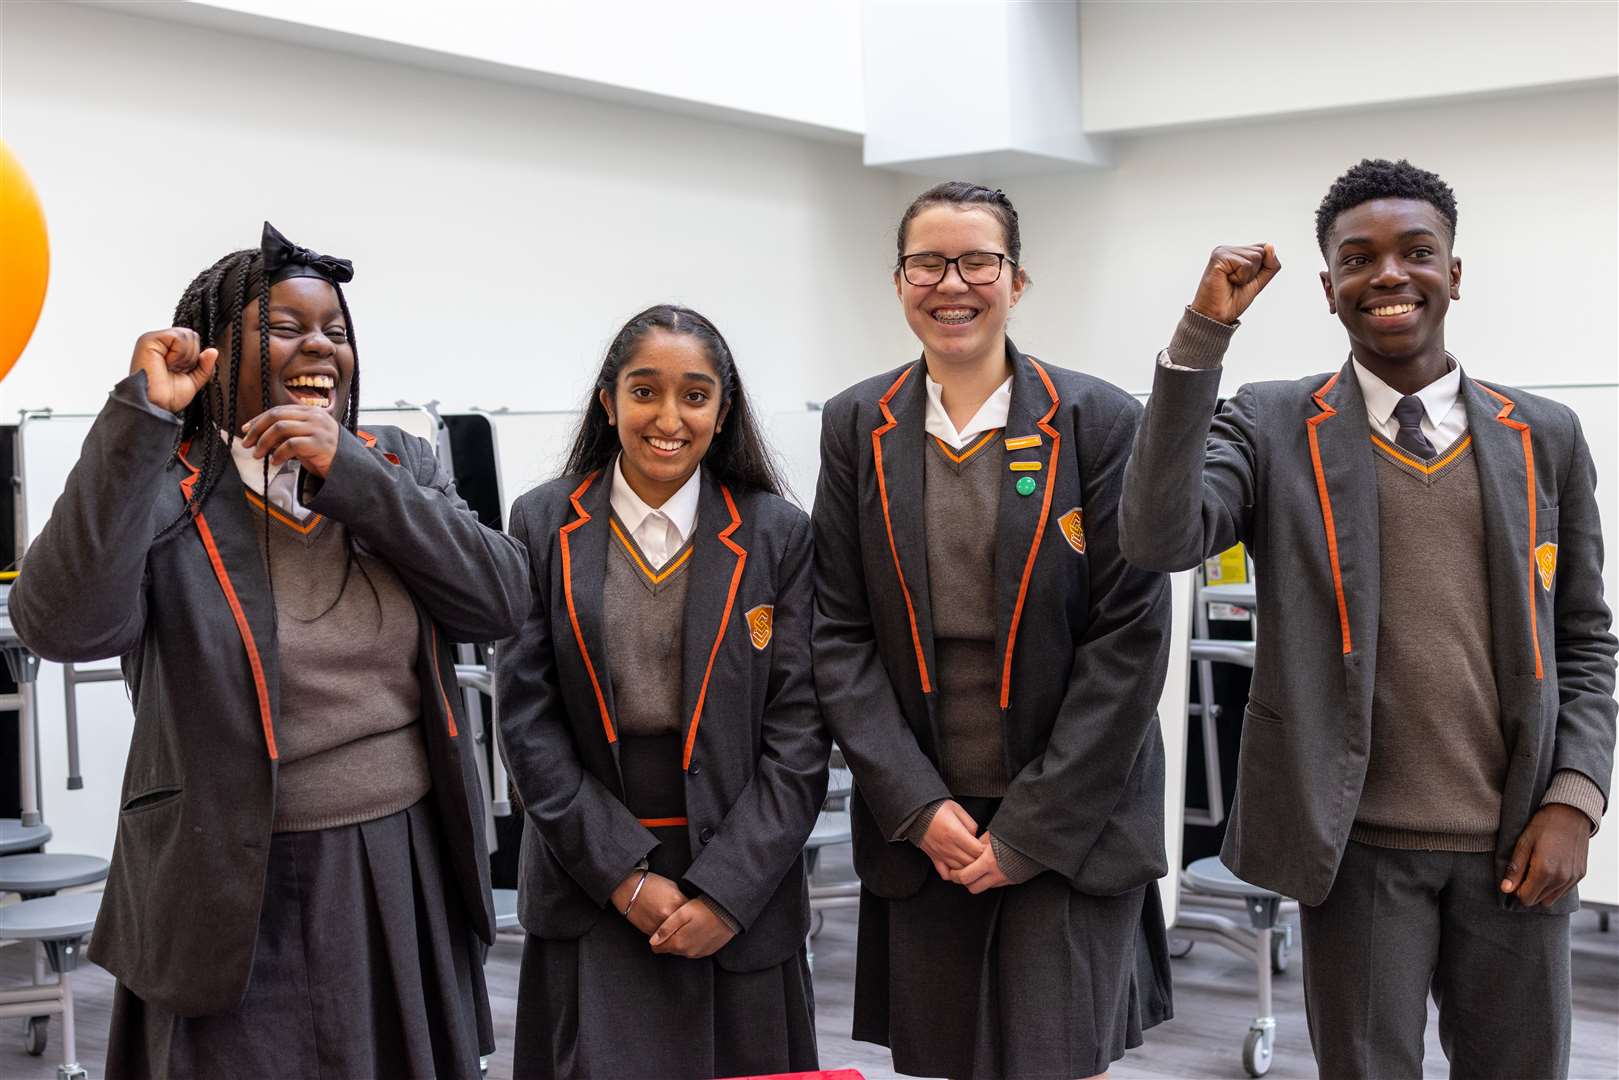 Year 9 students were excited to move into the new building. Photo: Endeavour MAT (57431416)